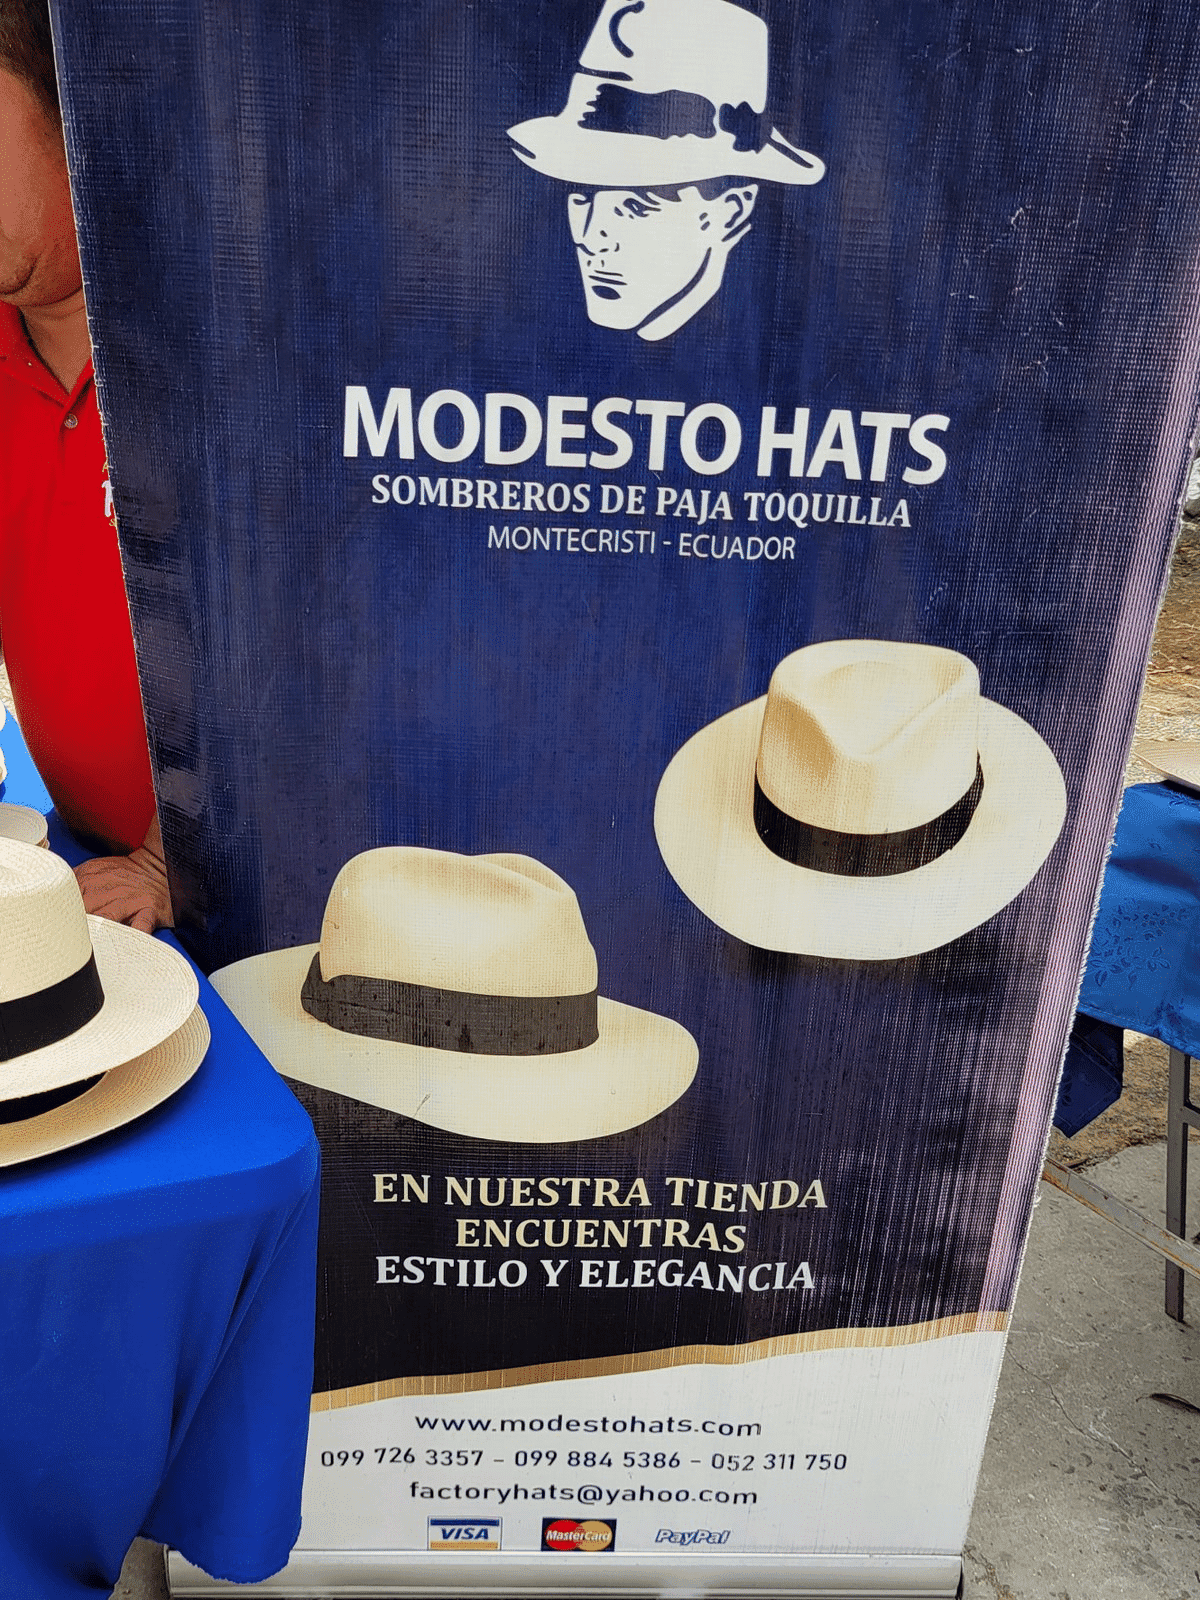 Despite the name, Panama hats have never been made in Panama. They originate in Ecuador, the only place in the world thathas had such a long-lasting weaving tradition.